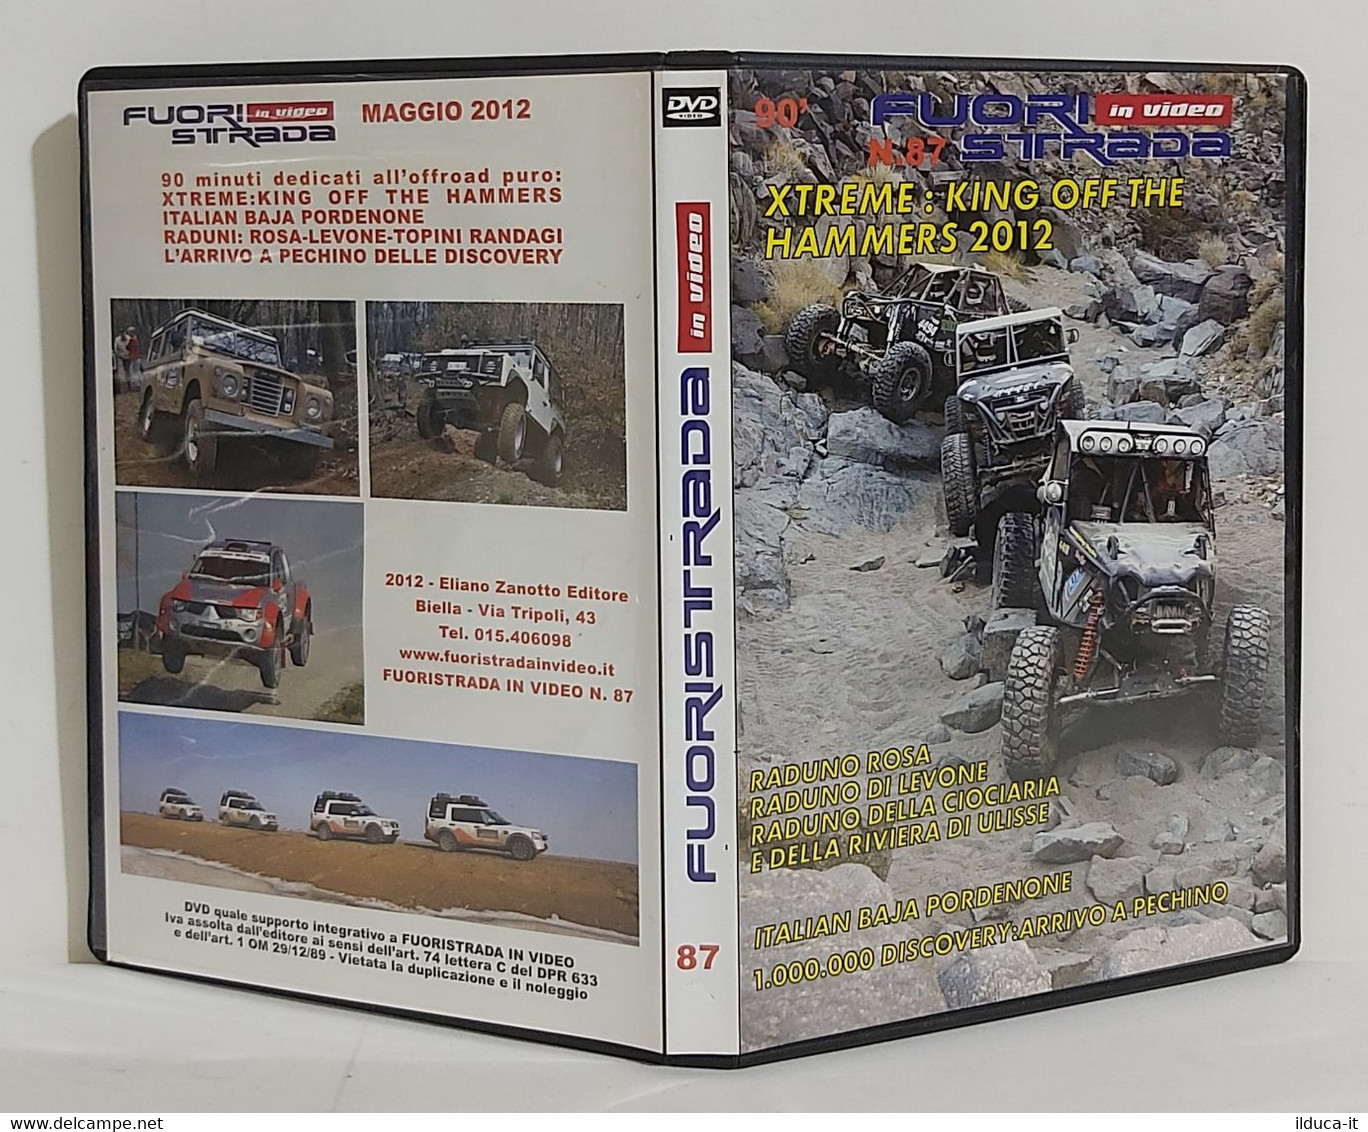 I101815 DVD - Fuoristrada In Video N. 87 - Xtreme: King Off The Hammers 2012 - Sport